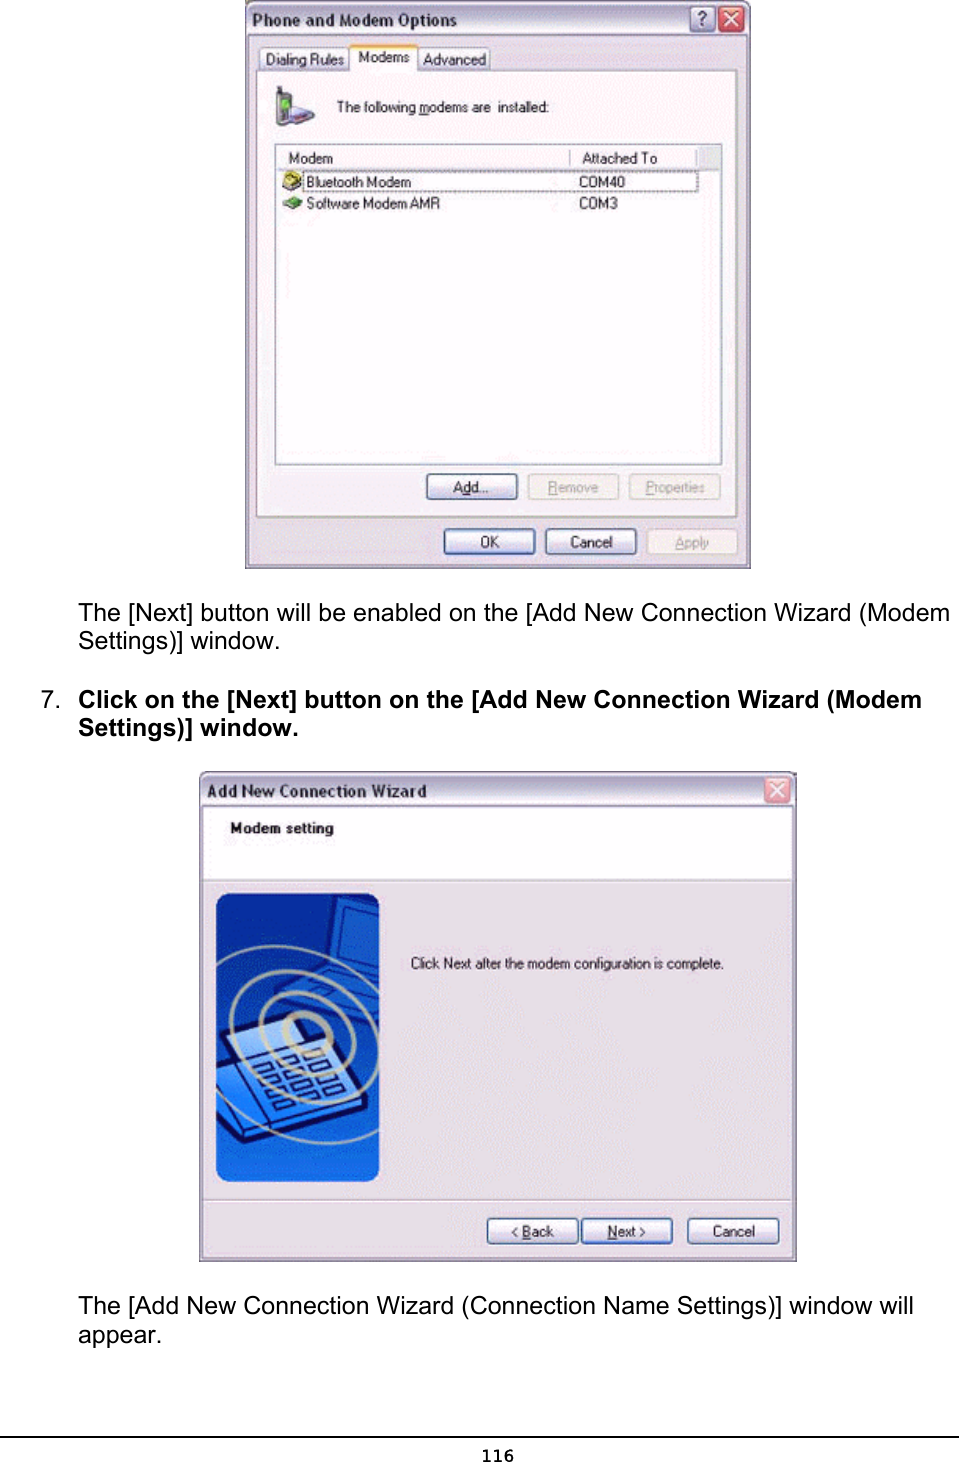         The [Next] button will be enabled on the [Add New Connection Wizard (Modem    Settings)] window. 7.  Click on the [Next] button on the [Add New Connection Wizard (Modem Settings)] window.        The [Add New Connection Wizard (Connection Name Settings)] window will            appear.  116